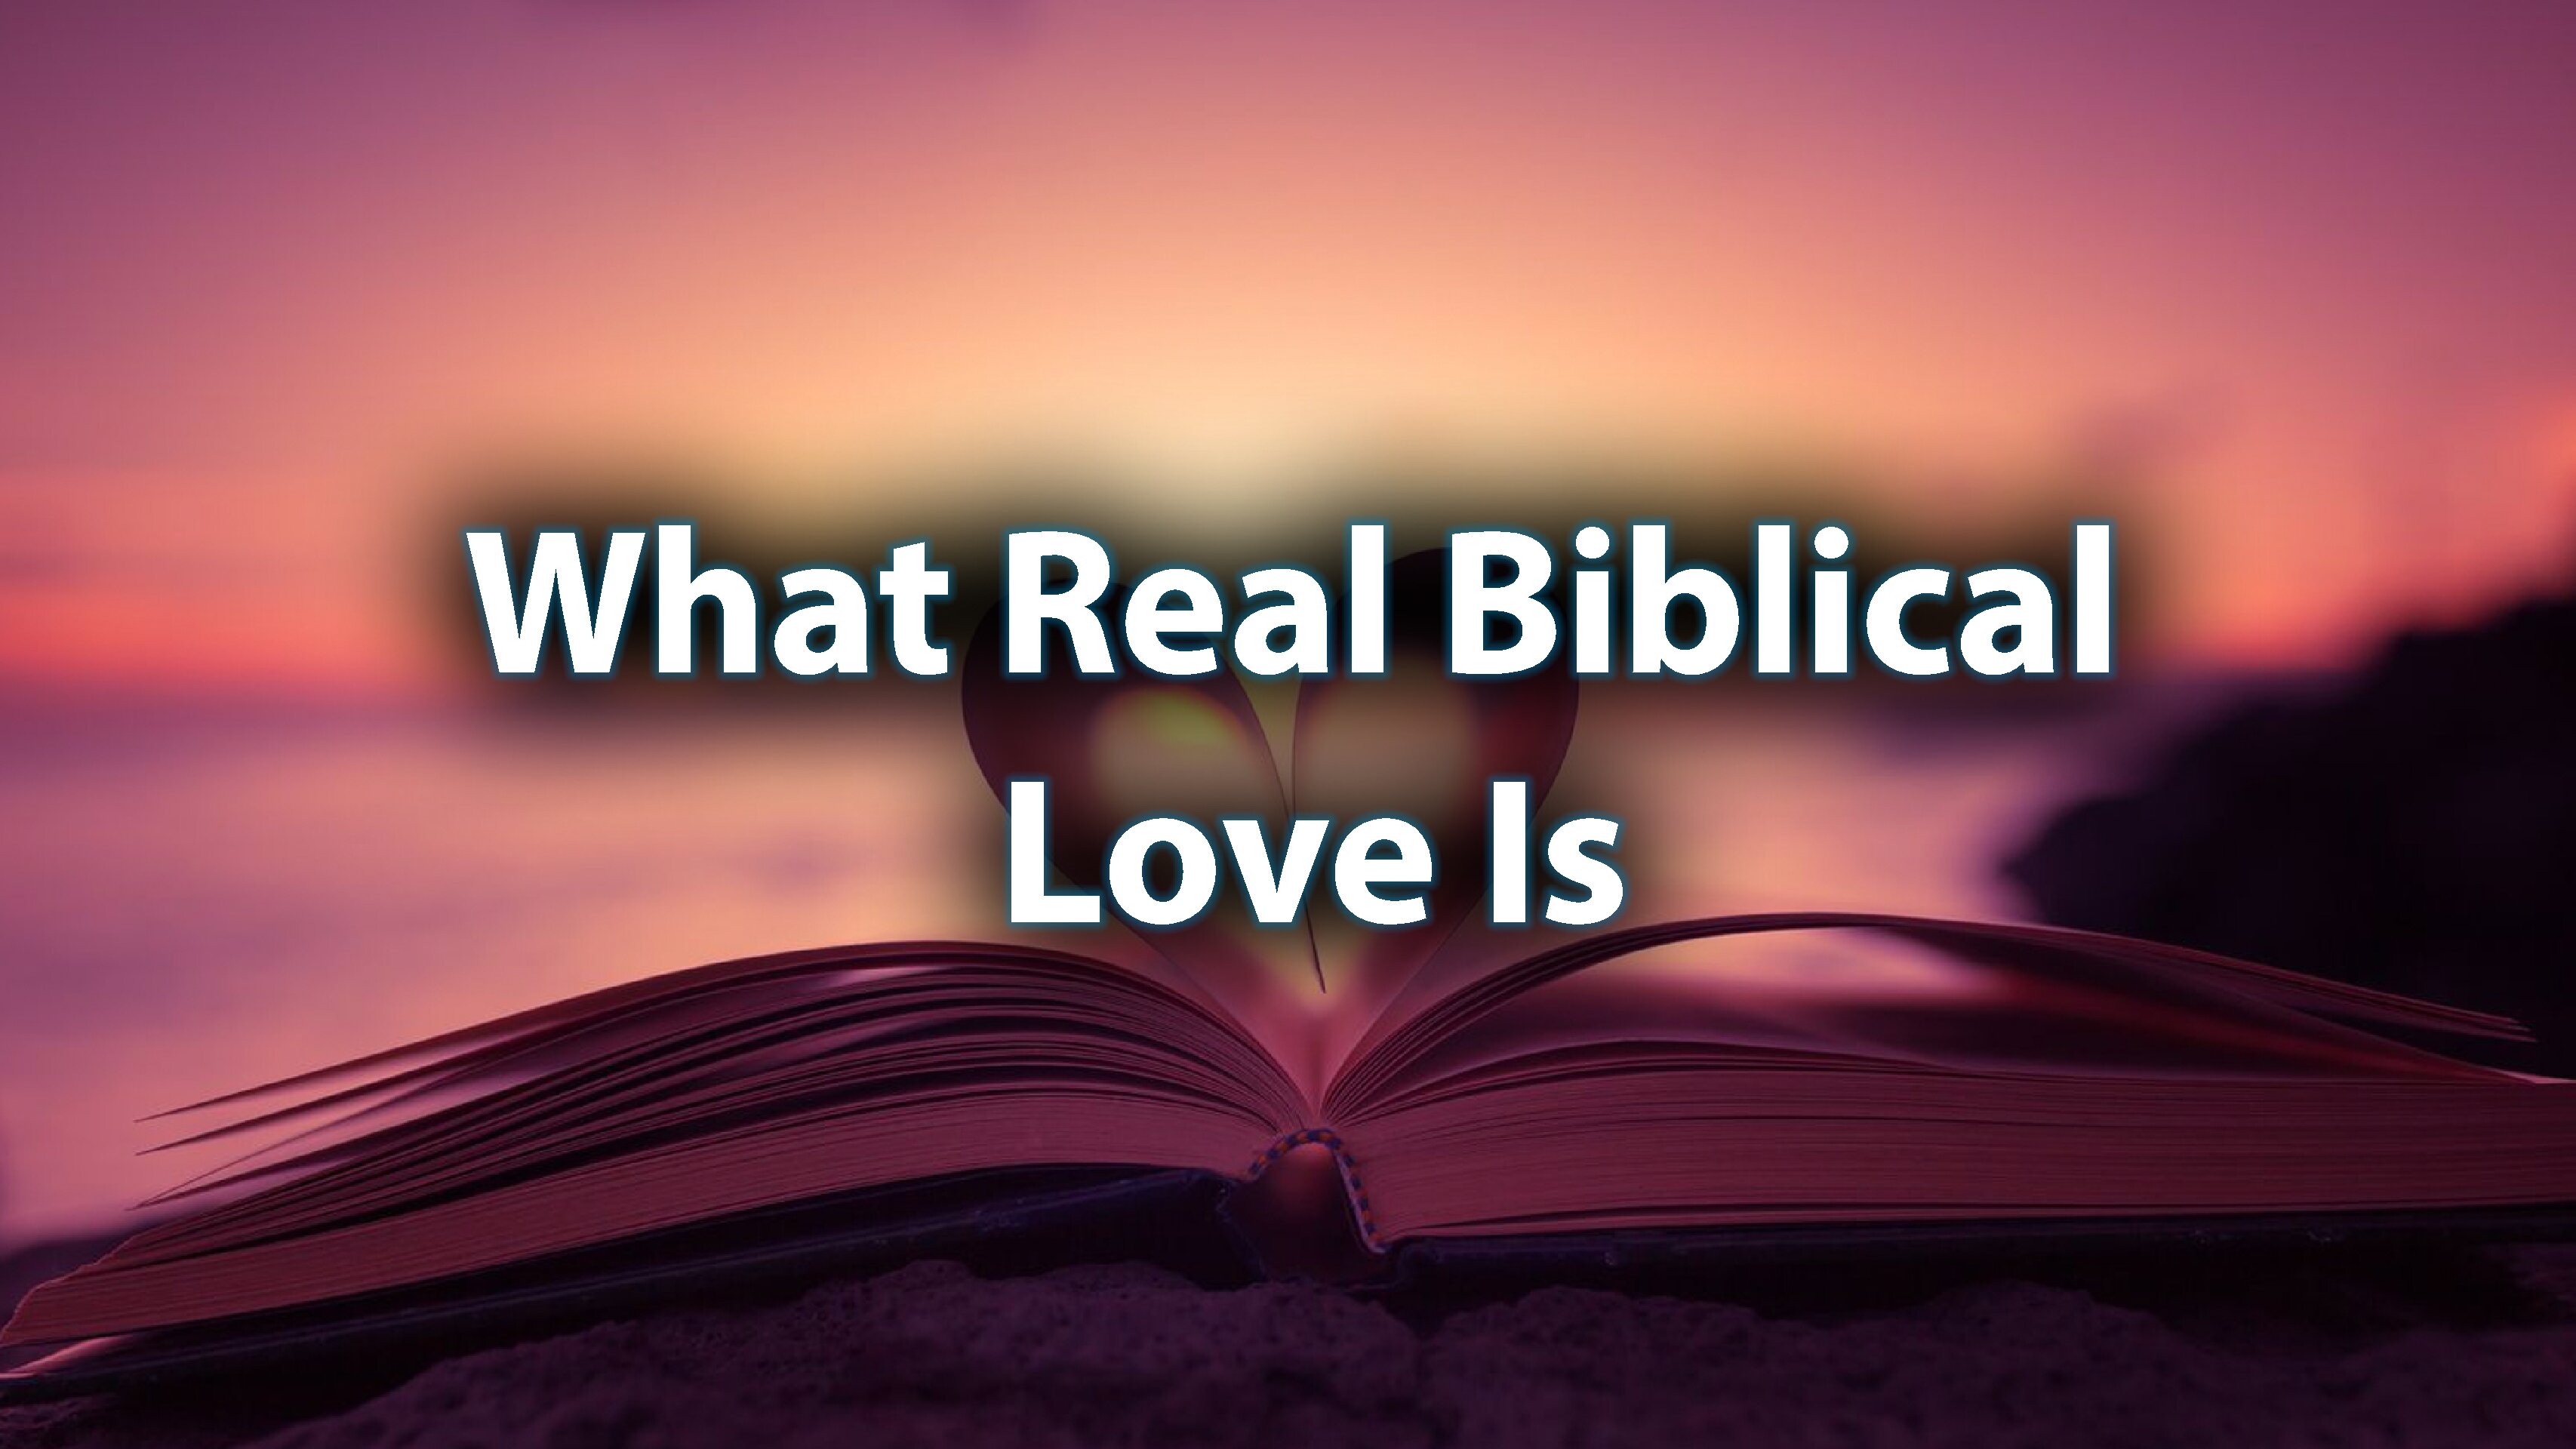 Day 21: What Real Biblical Love Is